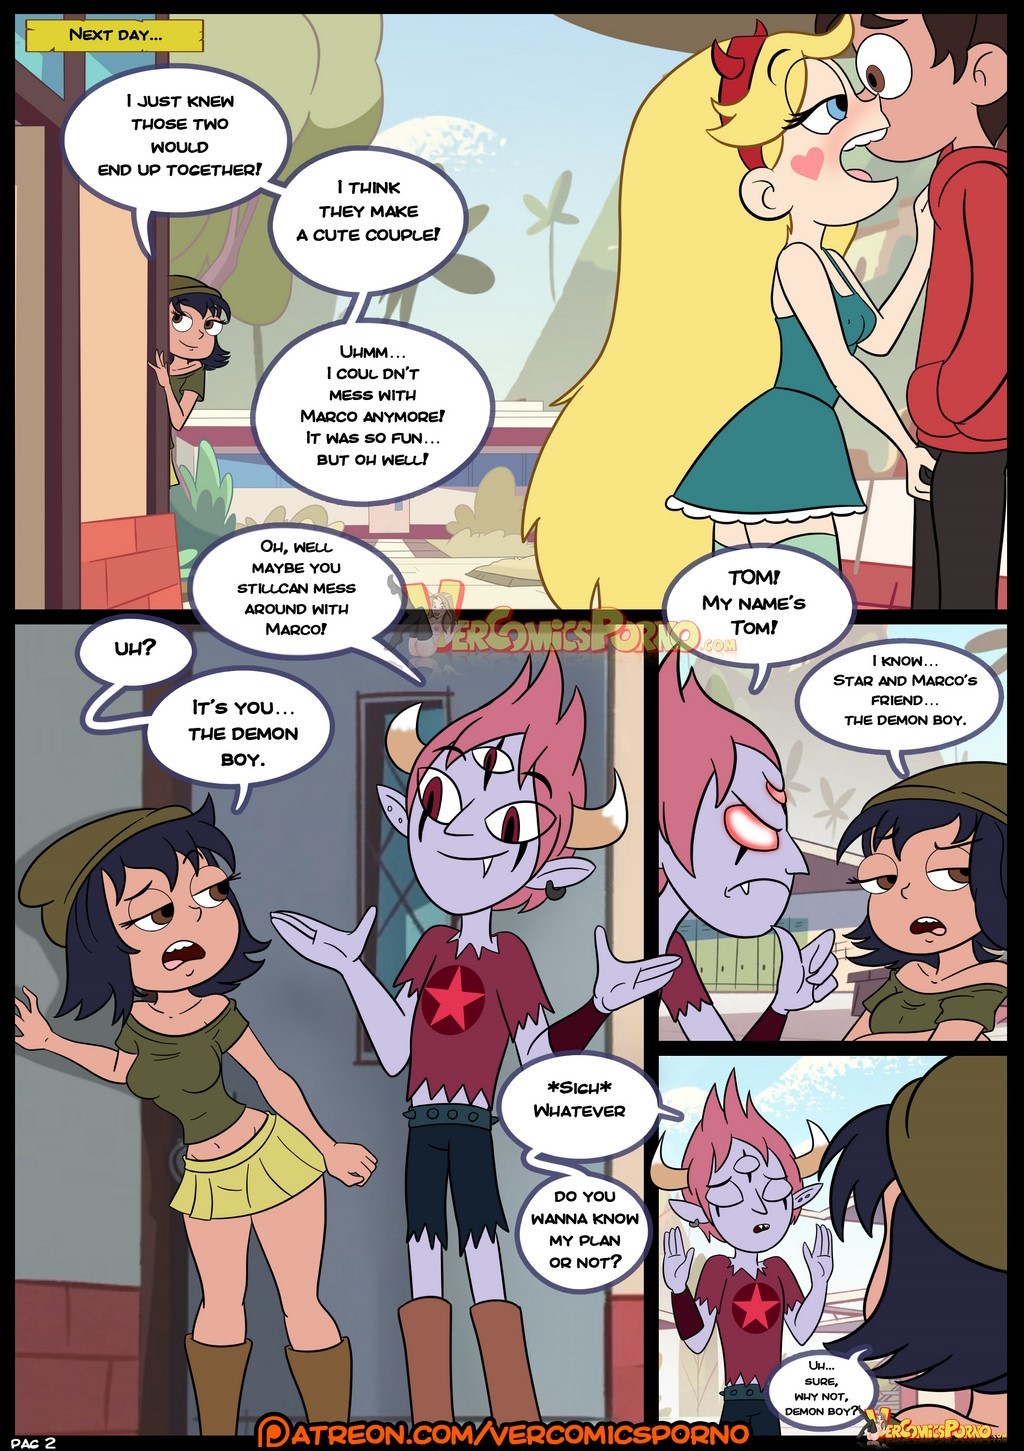 Croc-Star-Vs-the-forces-of-sex-III-3.jpg